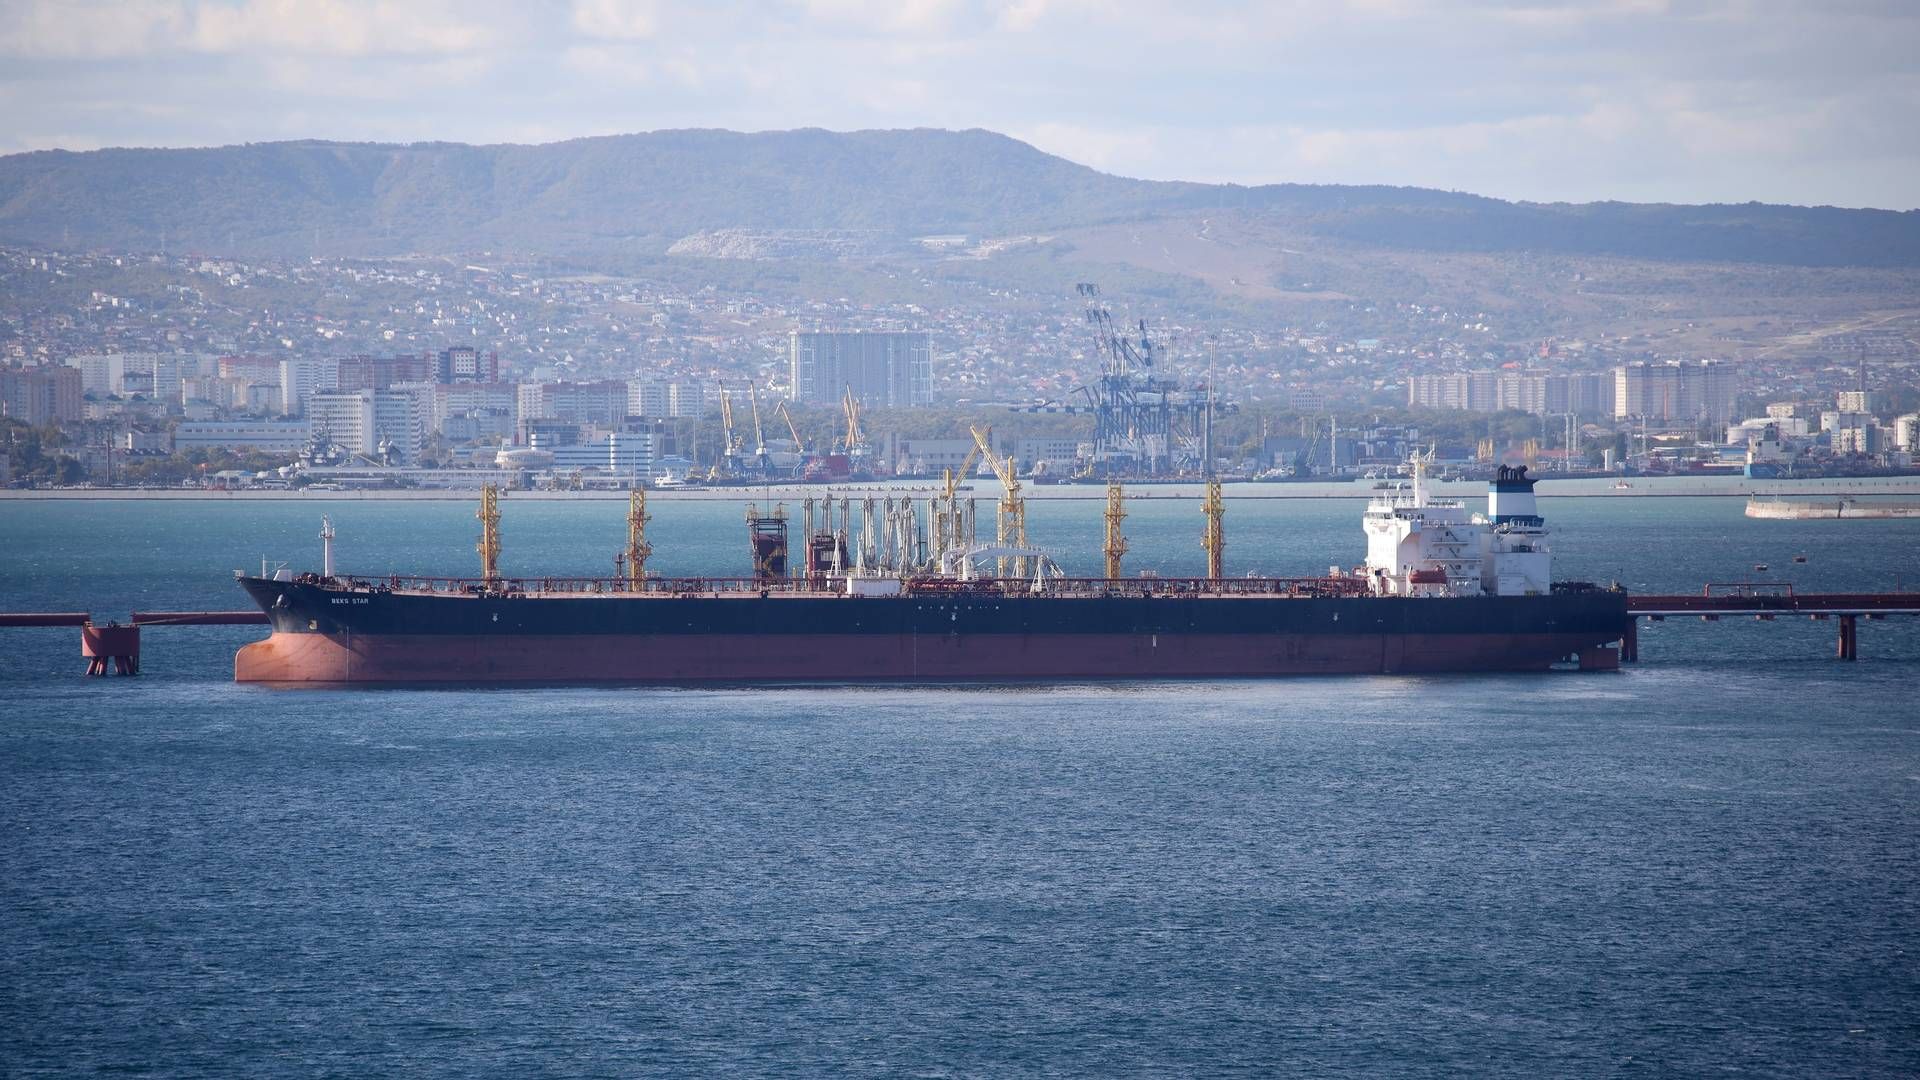 The blocking of ships would have to be done under UN rules that allow countries to check ships for fear that they may pose an environmental threat. File photo of tanker in Russia. | Photo: Uncredited/AP/Ritzau Scanpix